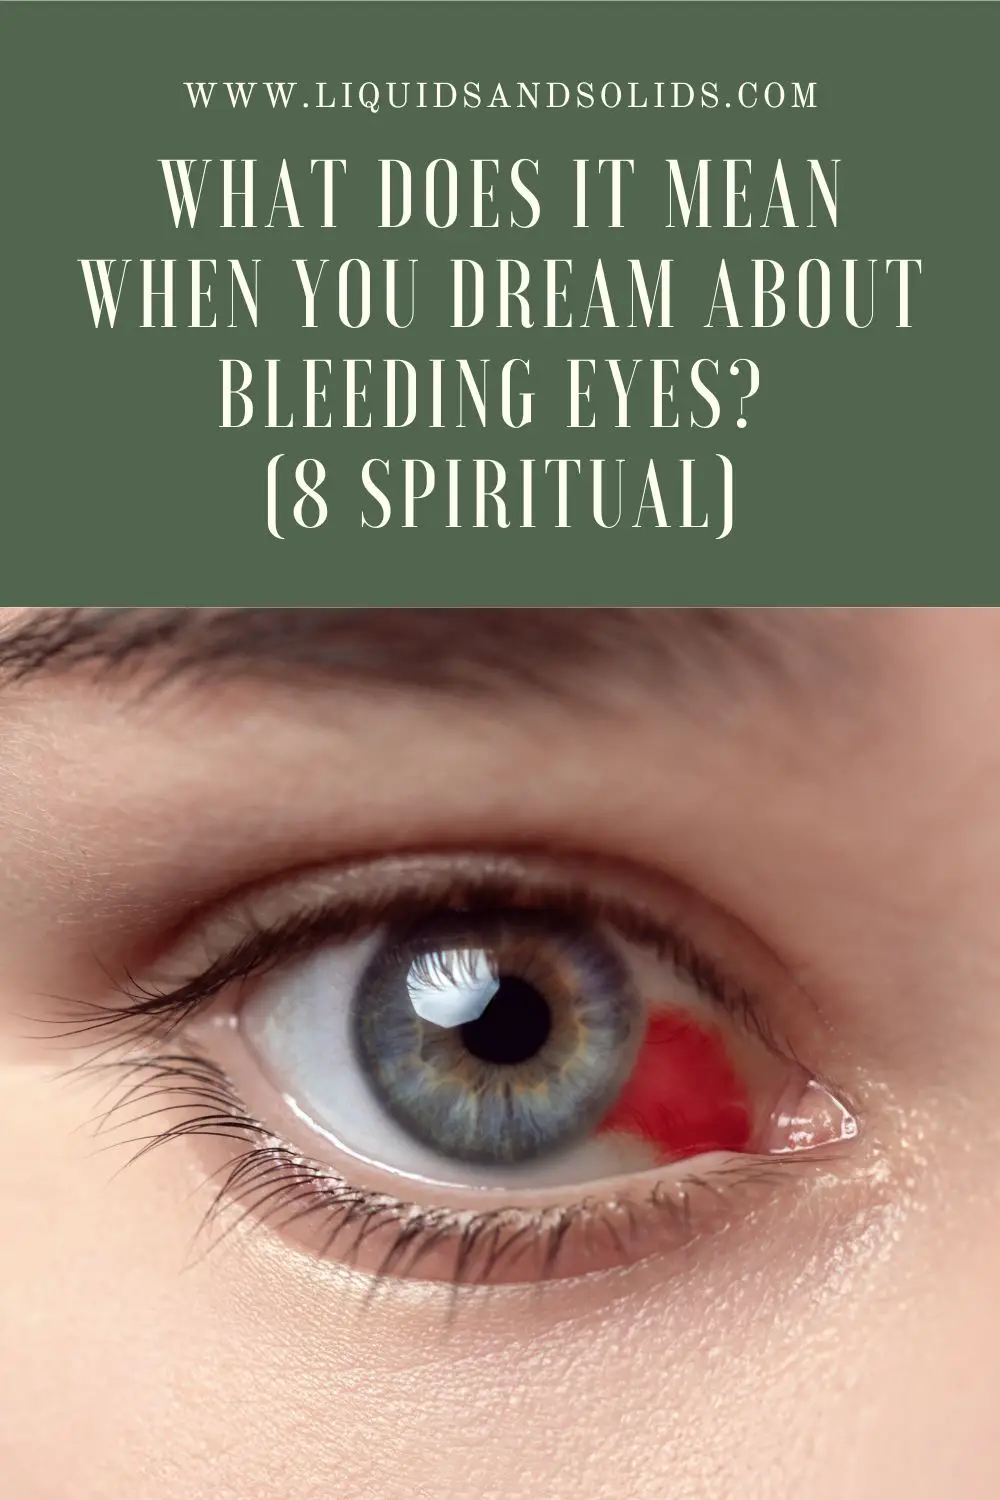 Dreams About Bleeding Eyes: Symbolic Meanings